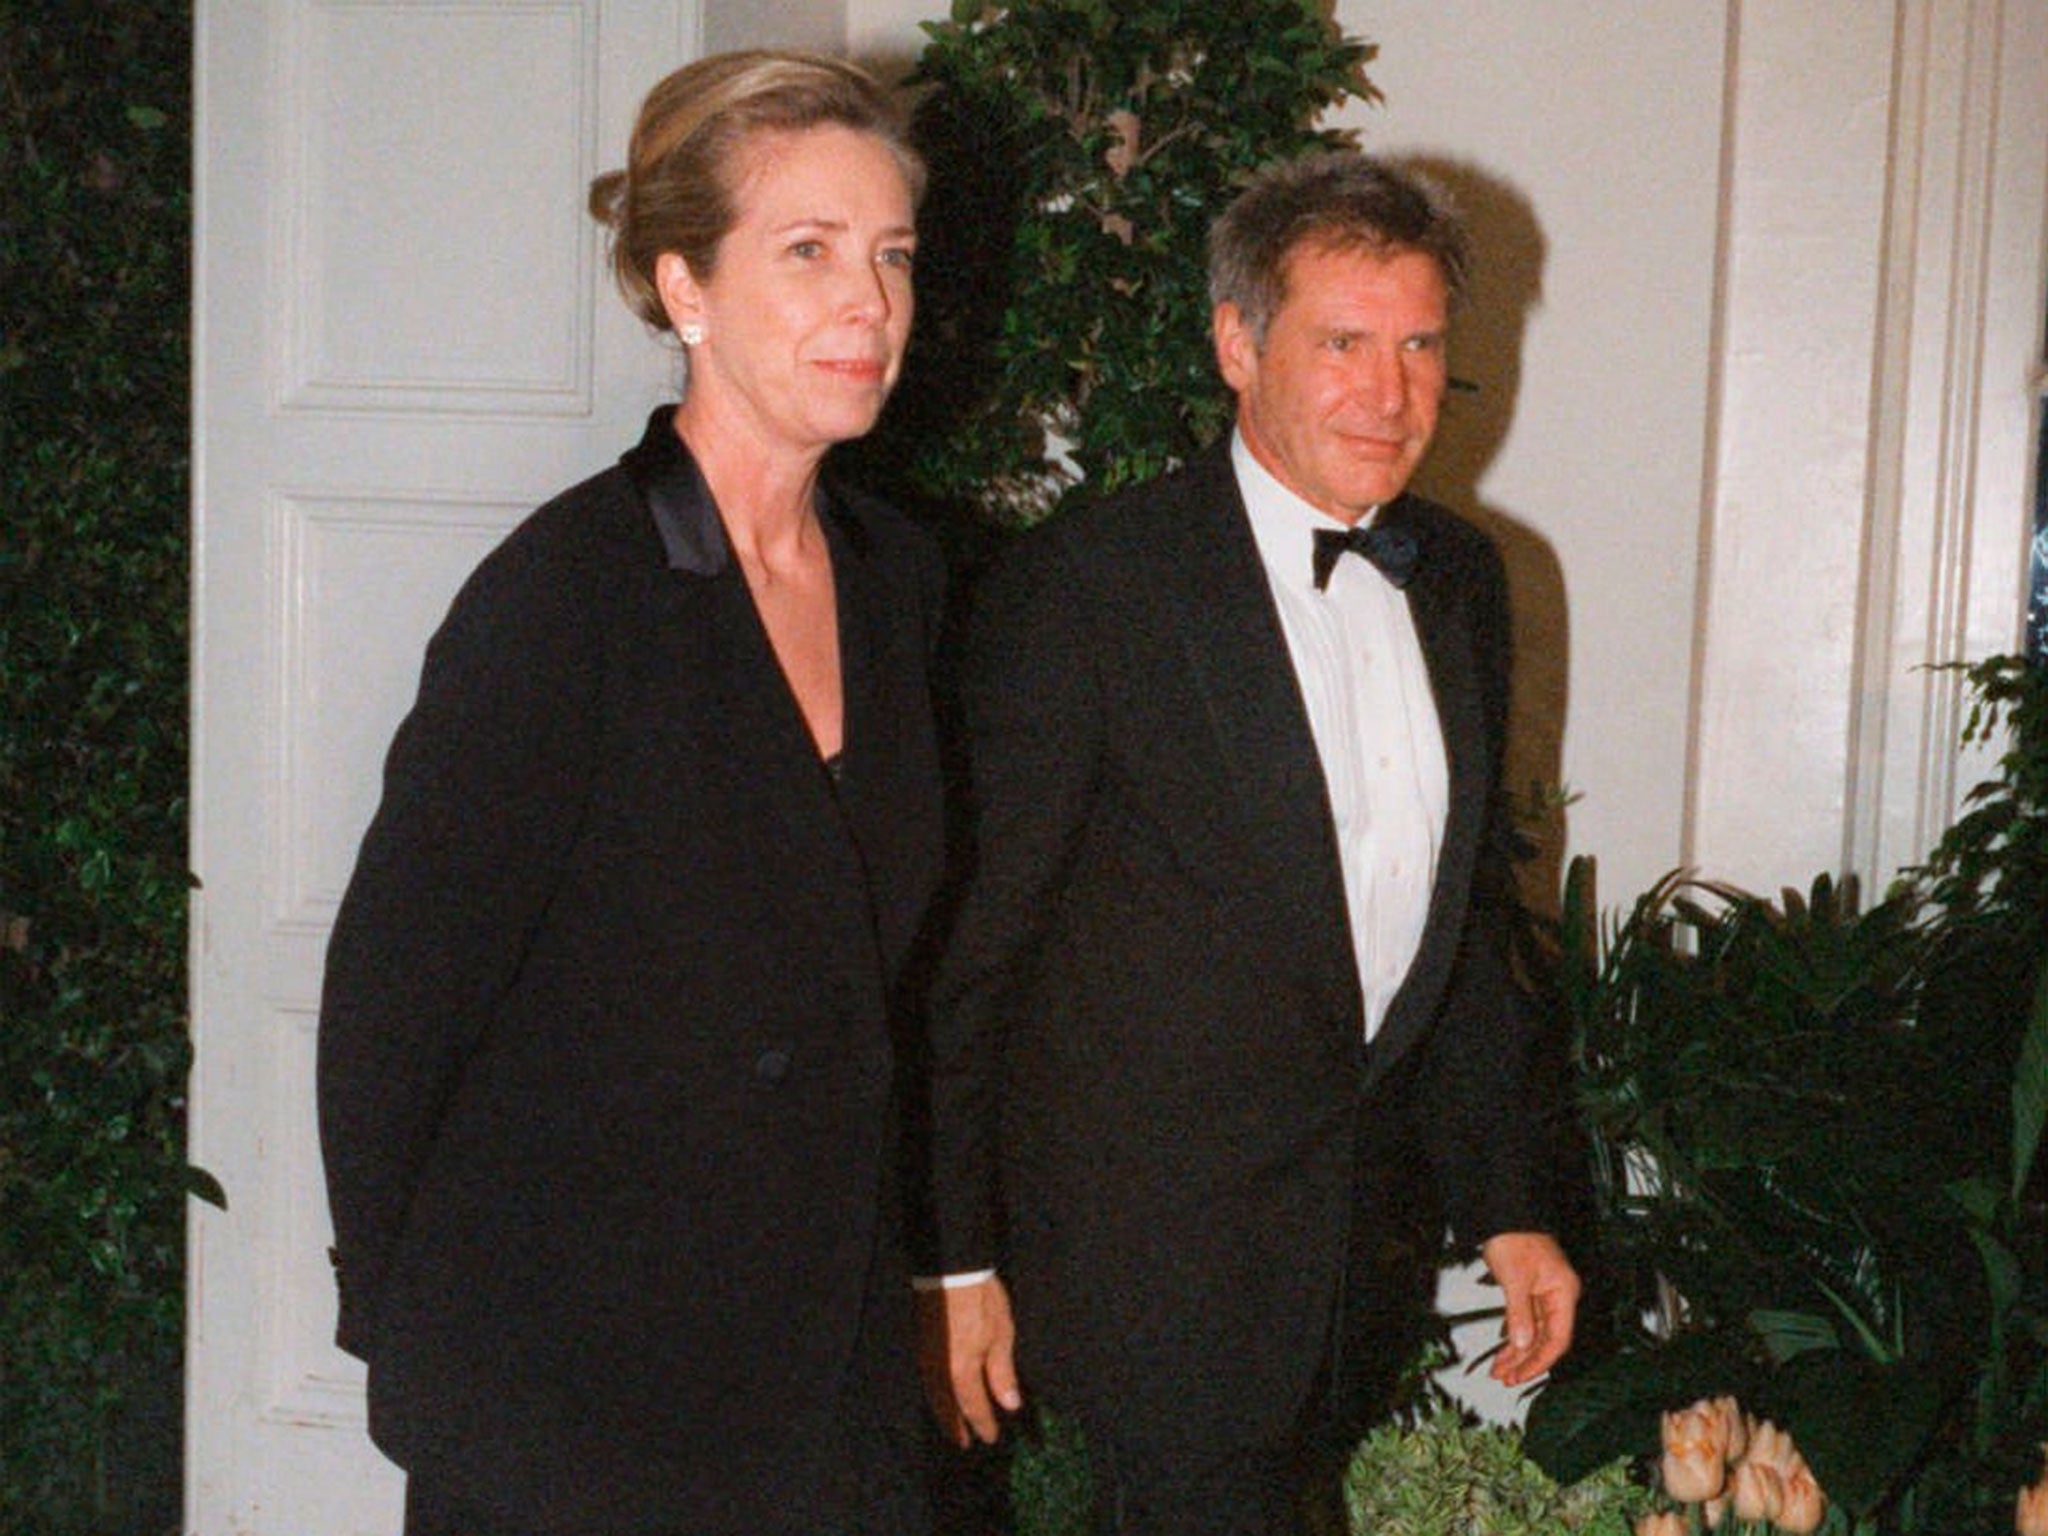 Mathison in 1998 with her then husband, Harrison Ford, arriving at a White House dinner for Tony Blair